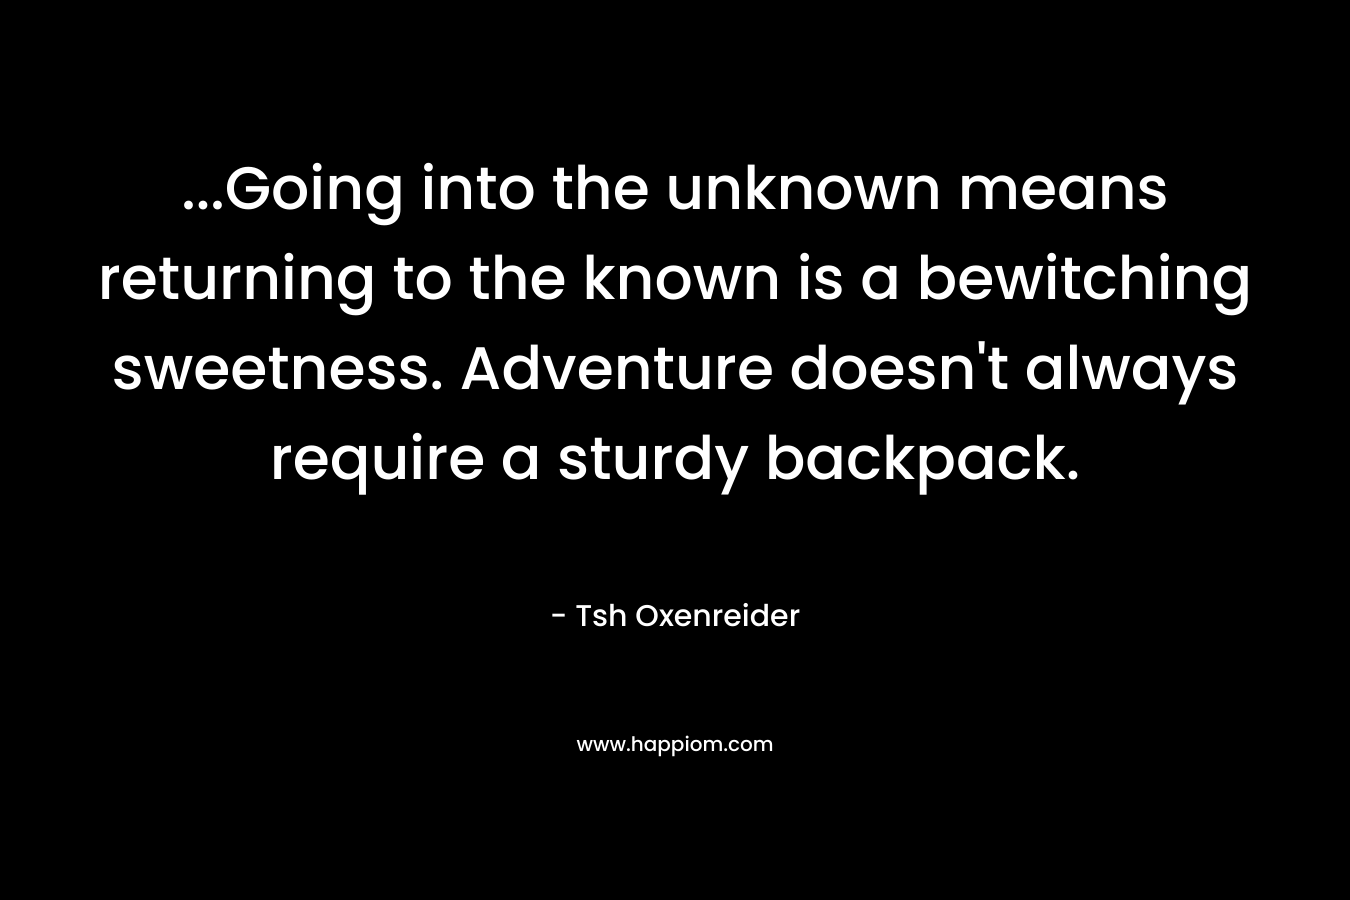 …Going into the unknown means returning to the known is a bewitching sweetness. Adventure doesn’t always require a sturdy backpack. – Tsh Oxenreider